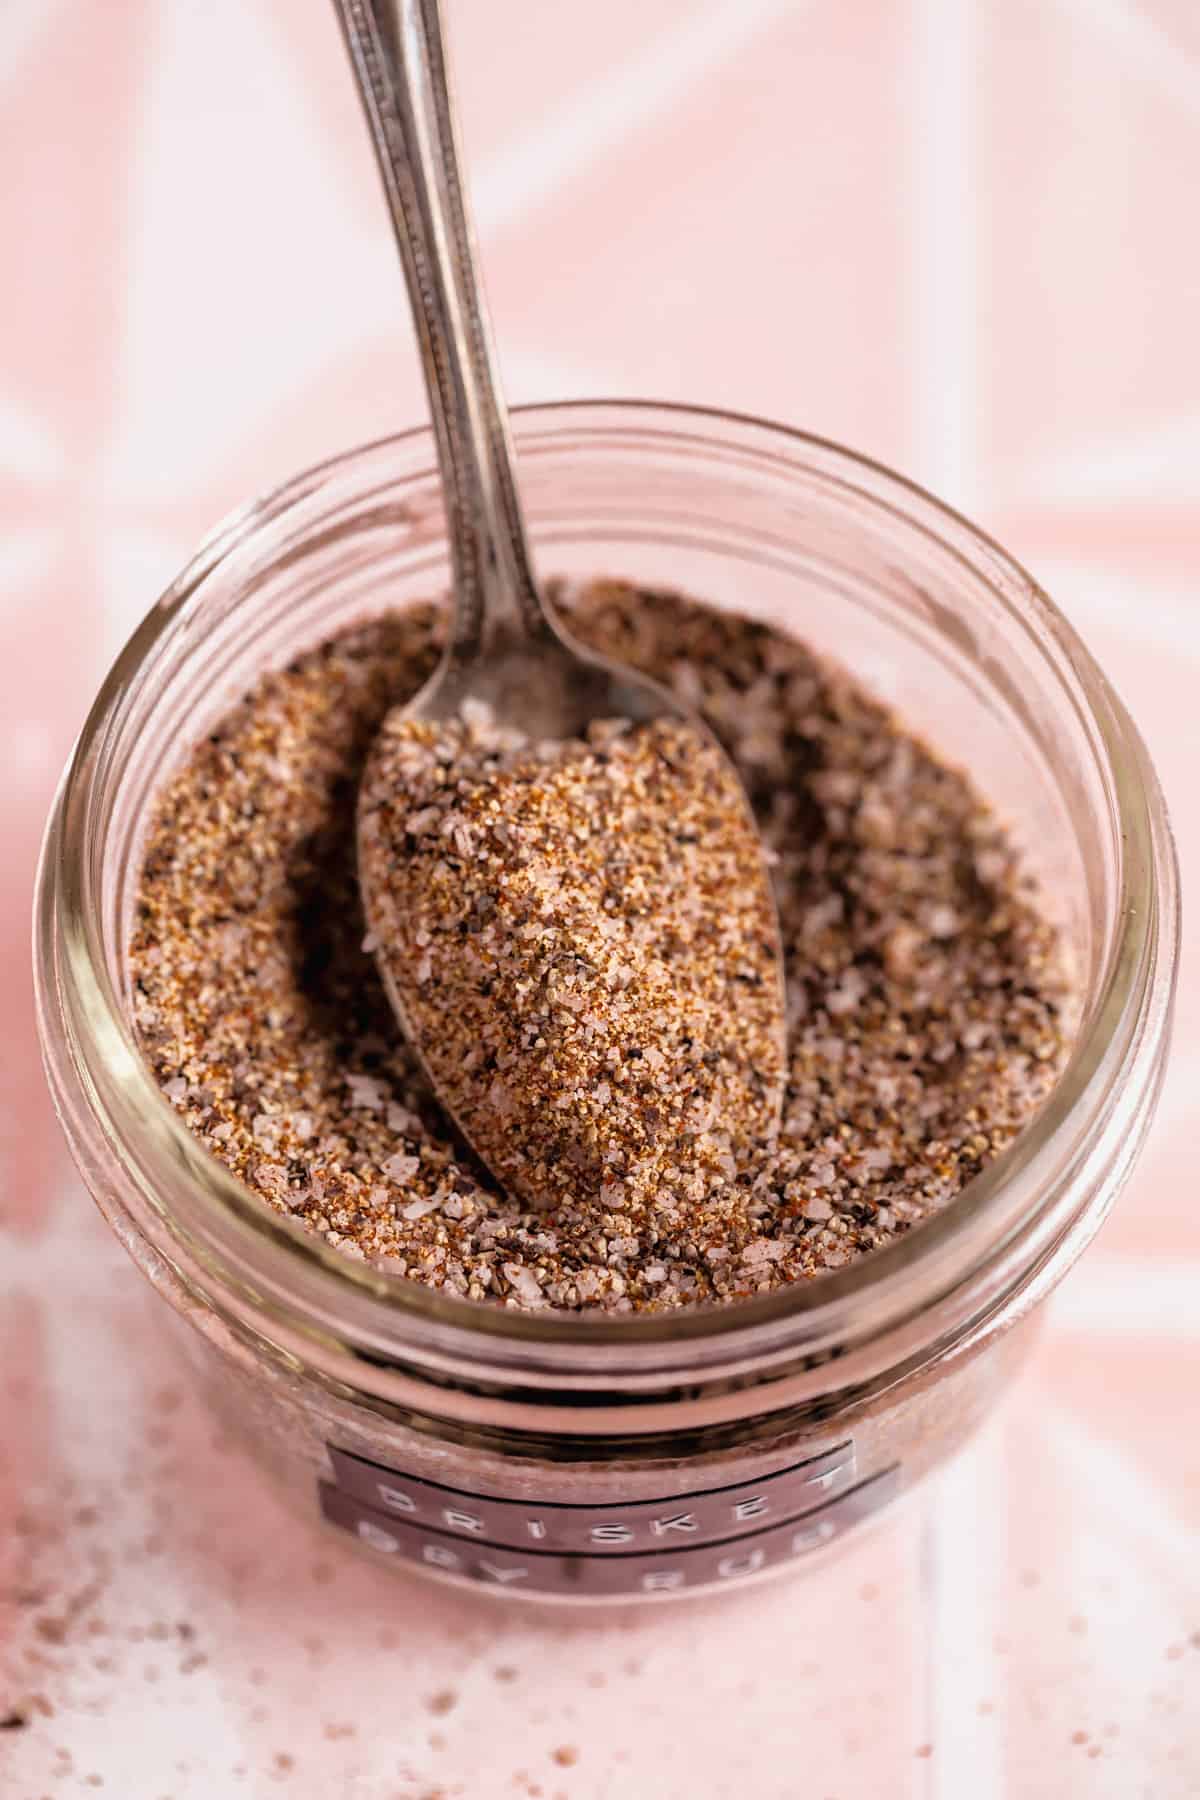 Spoon scooping up brisket rub from a glass jar.